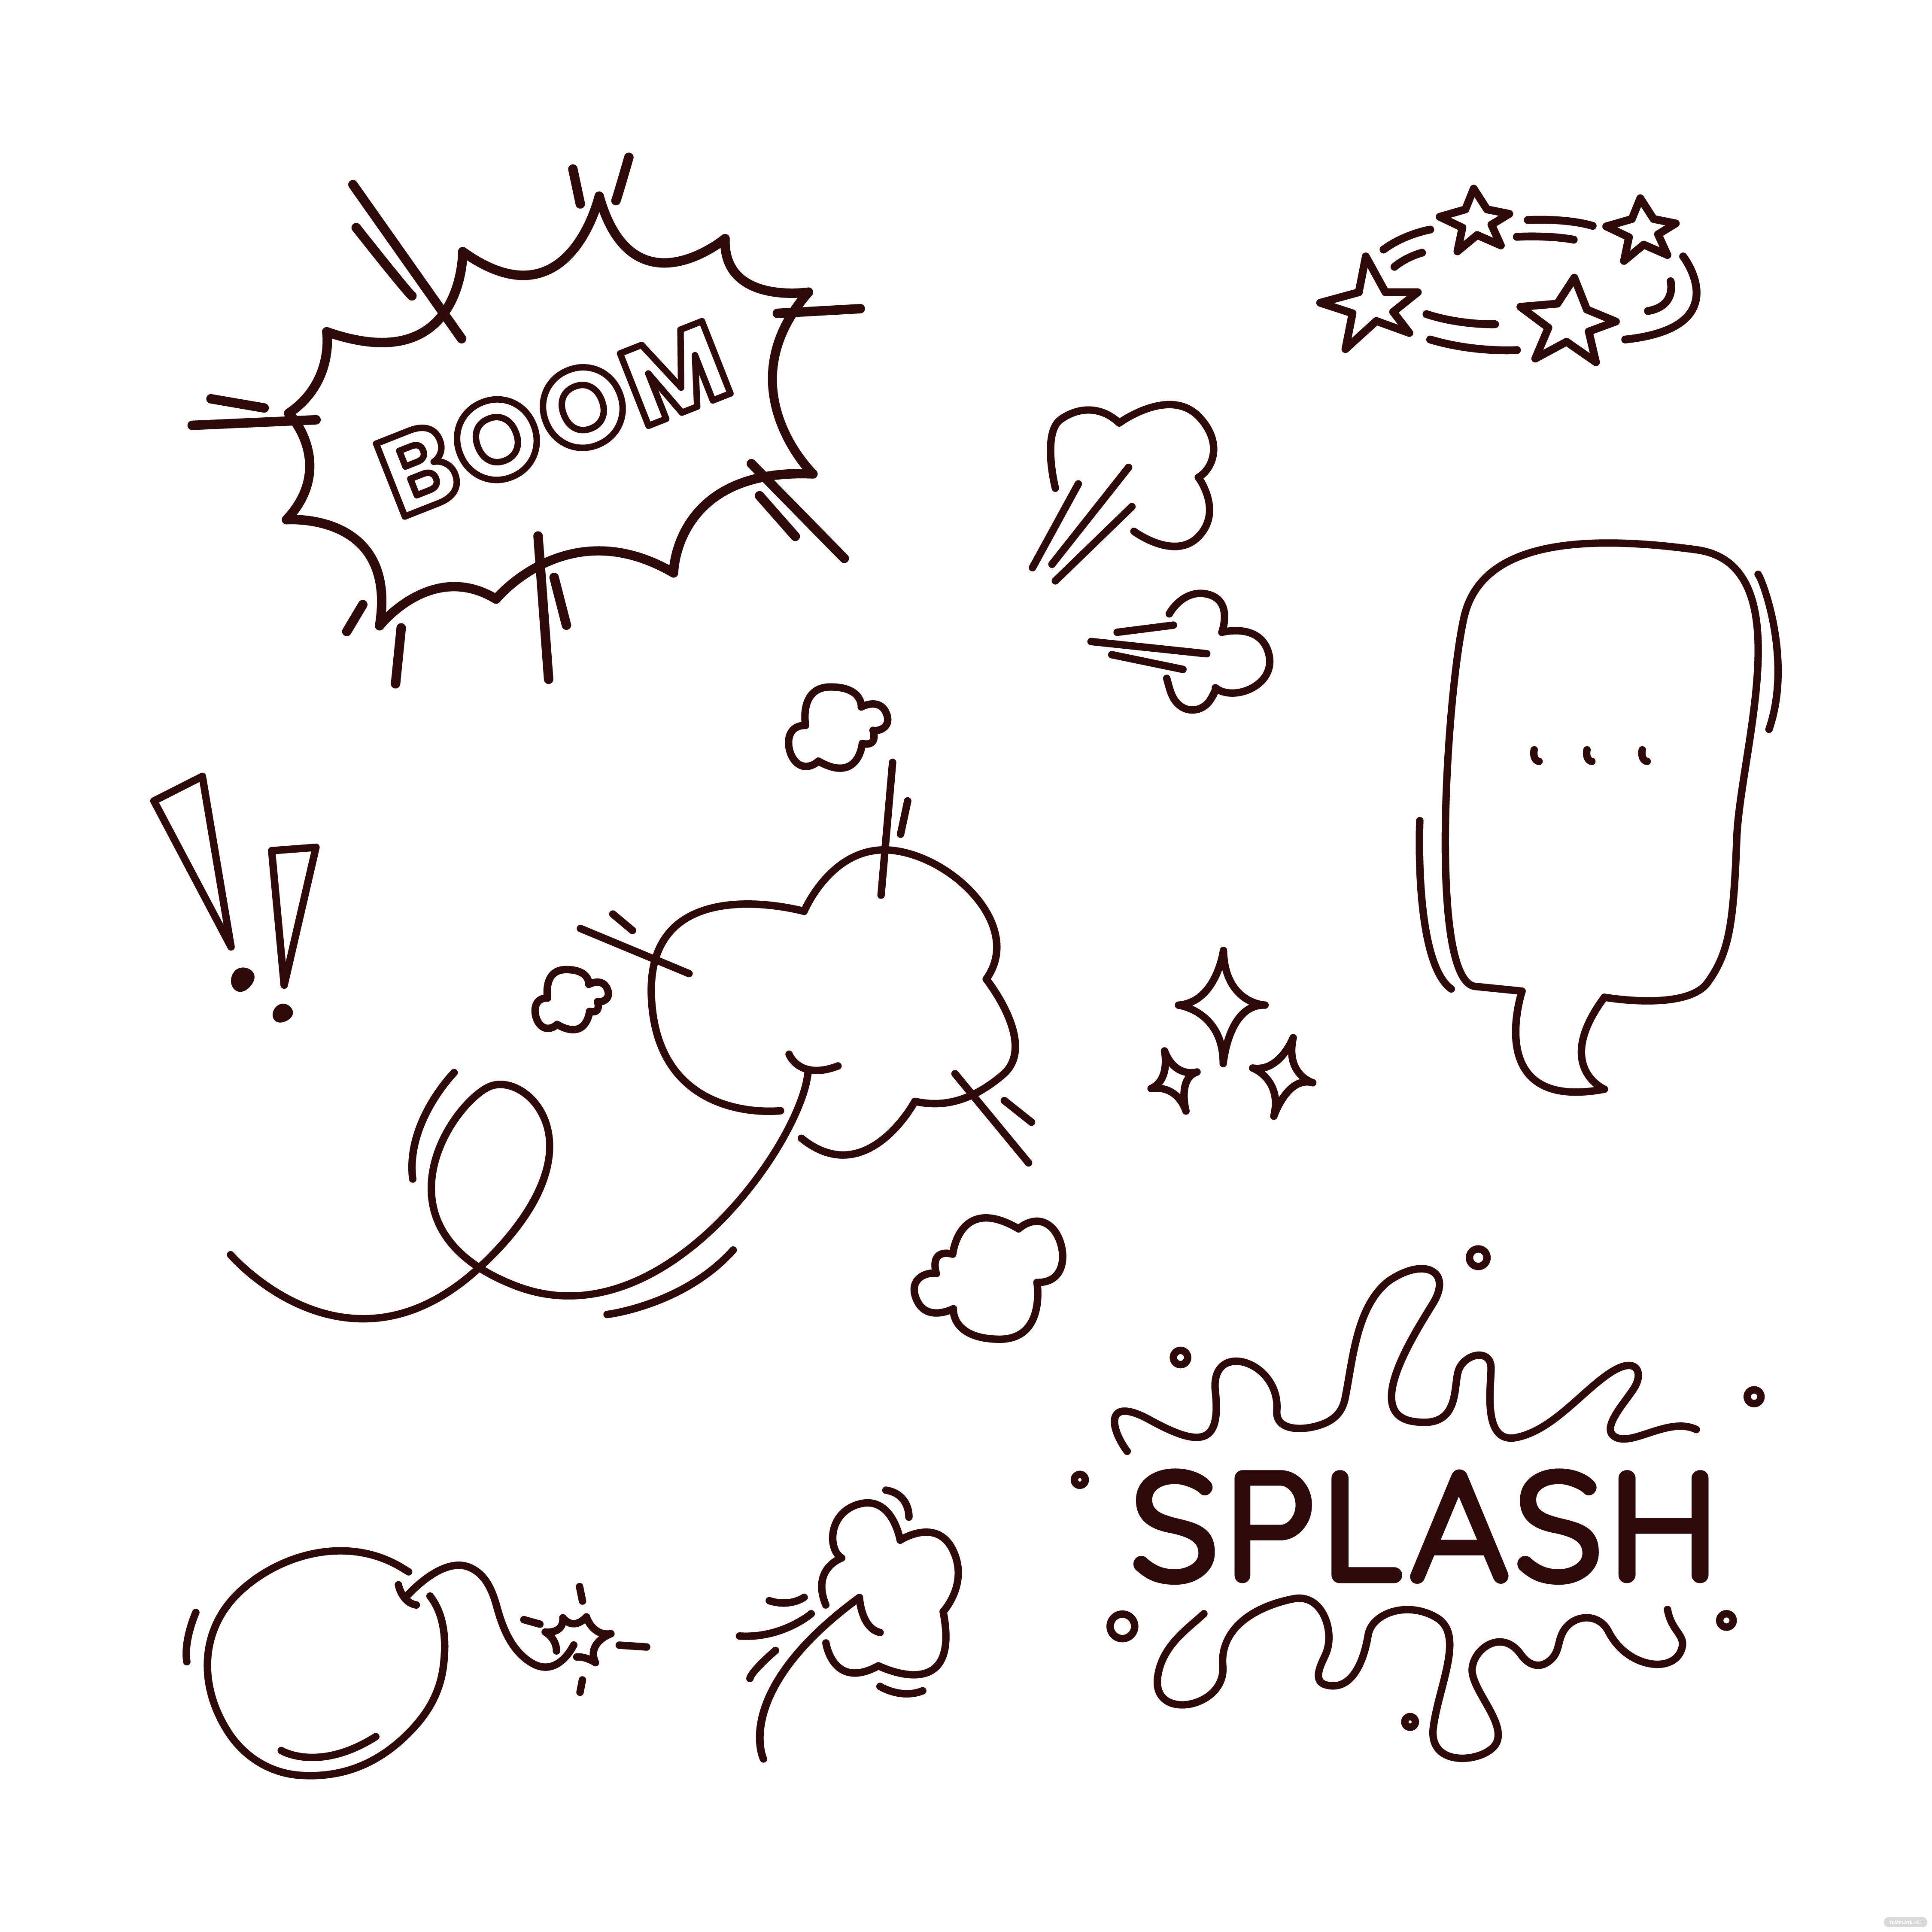 doodle vectors ideas and examples